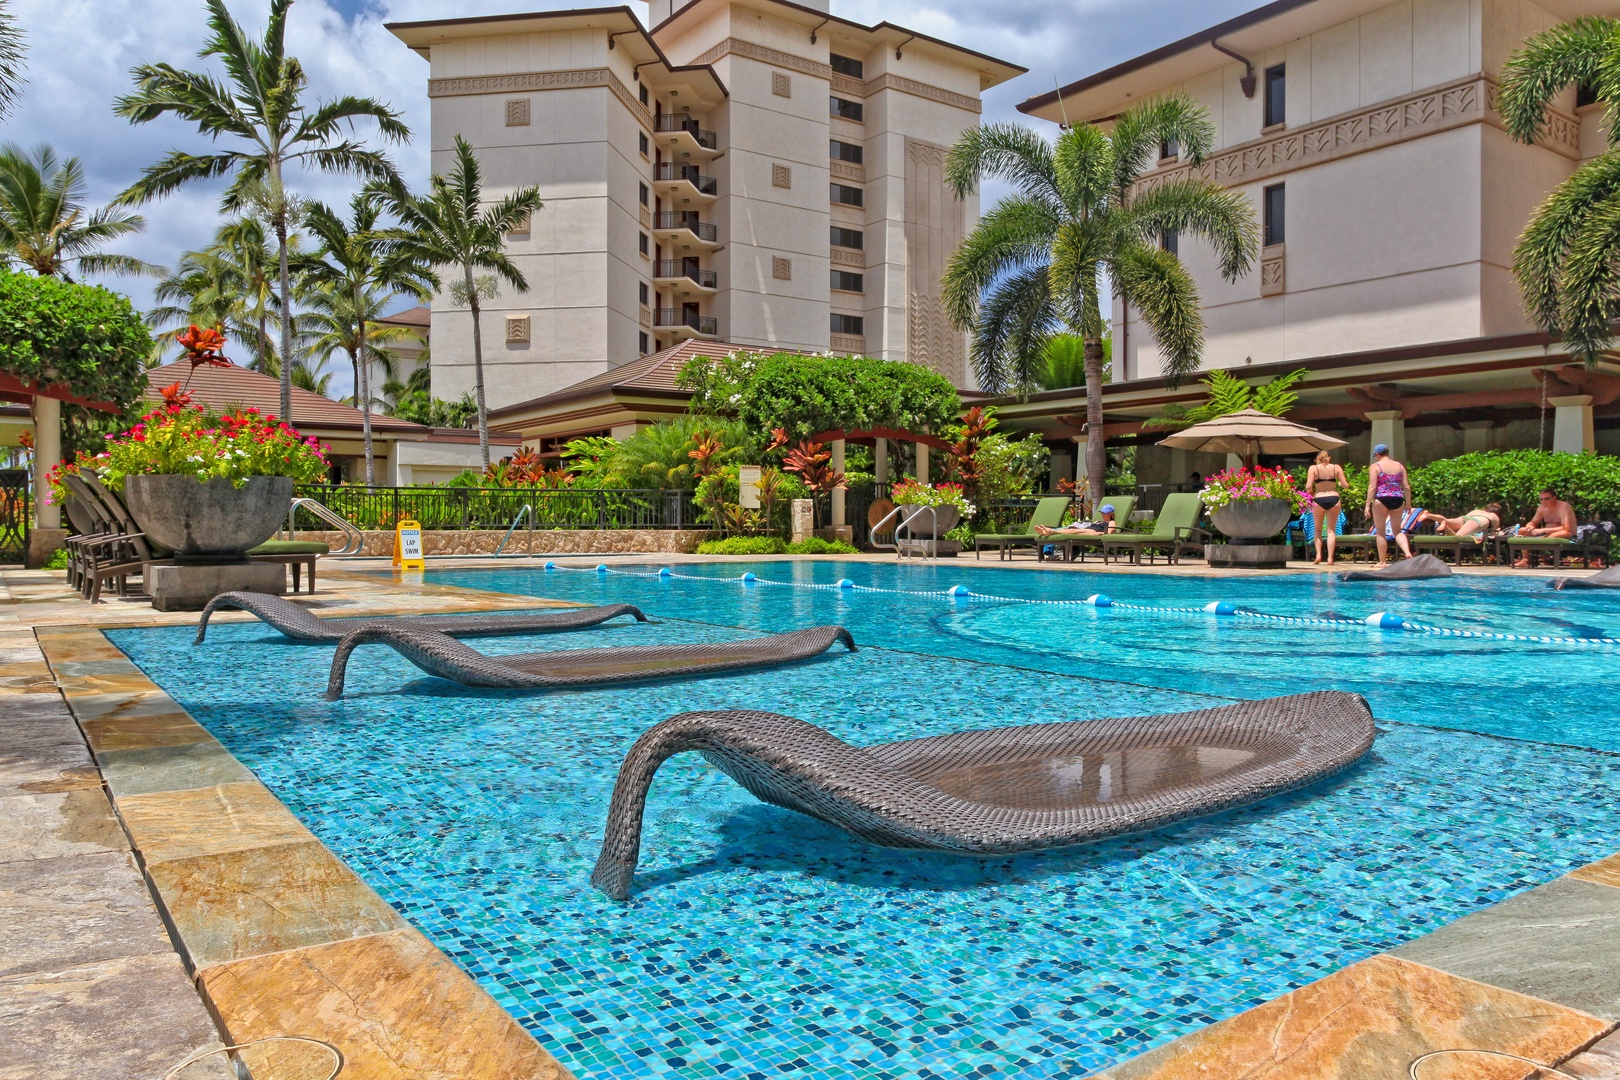 Kapolei Vacation Rentals, Ko Olina Beach Villas O210 - Welcome to the water loungers at edge of the lap pool.